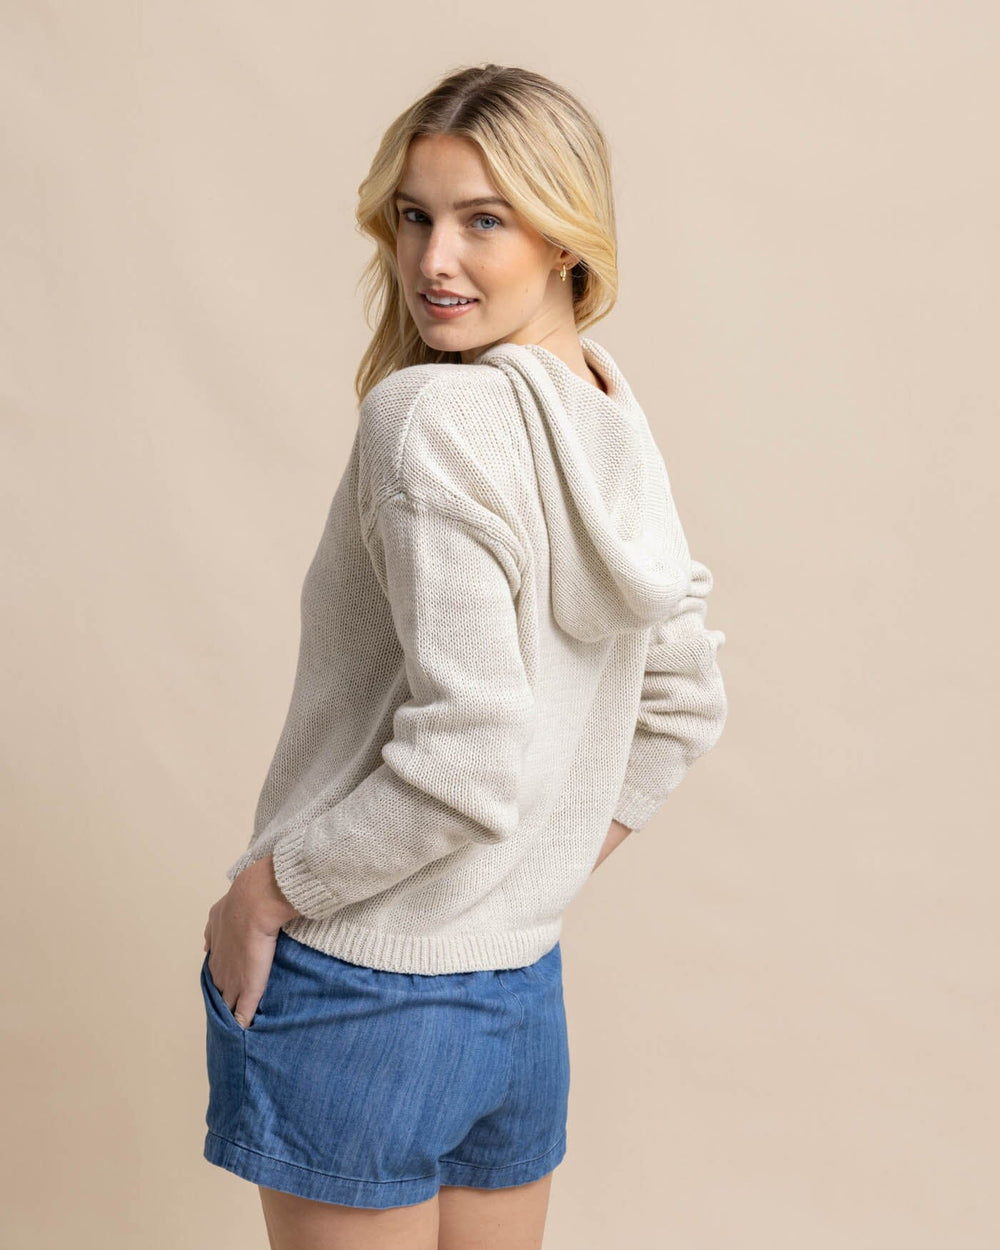 The back view of the Southern Tide Everlee Hoodie Sweater by Southern Tide - Stone